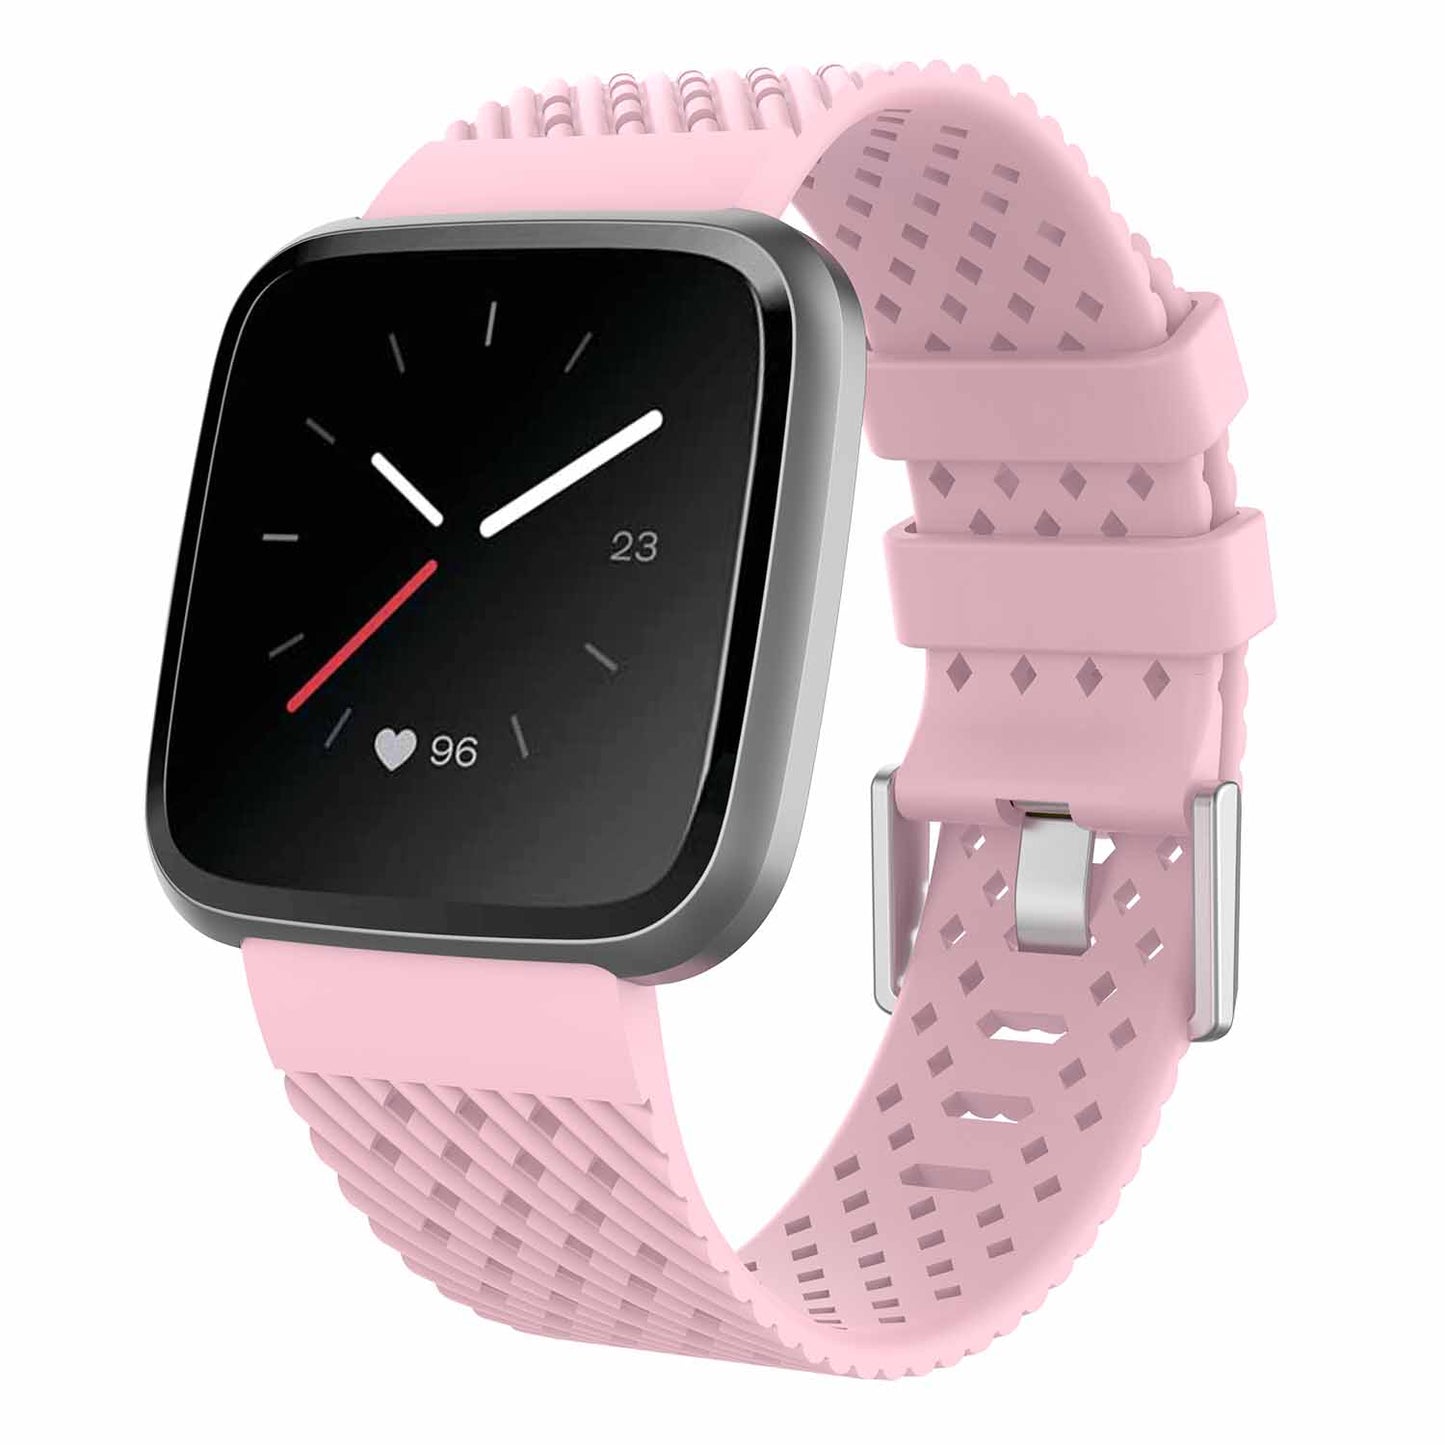 Vented Textured Silicone Strap for Fitbit Versa & Versa 2